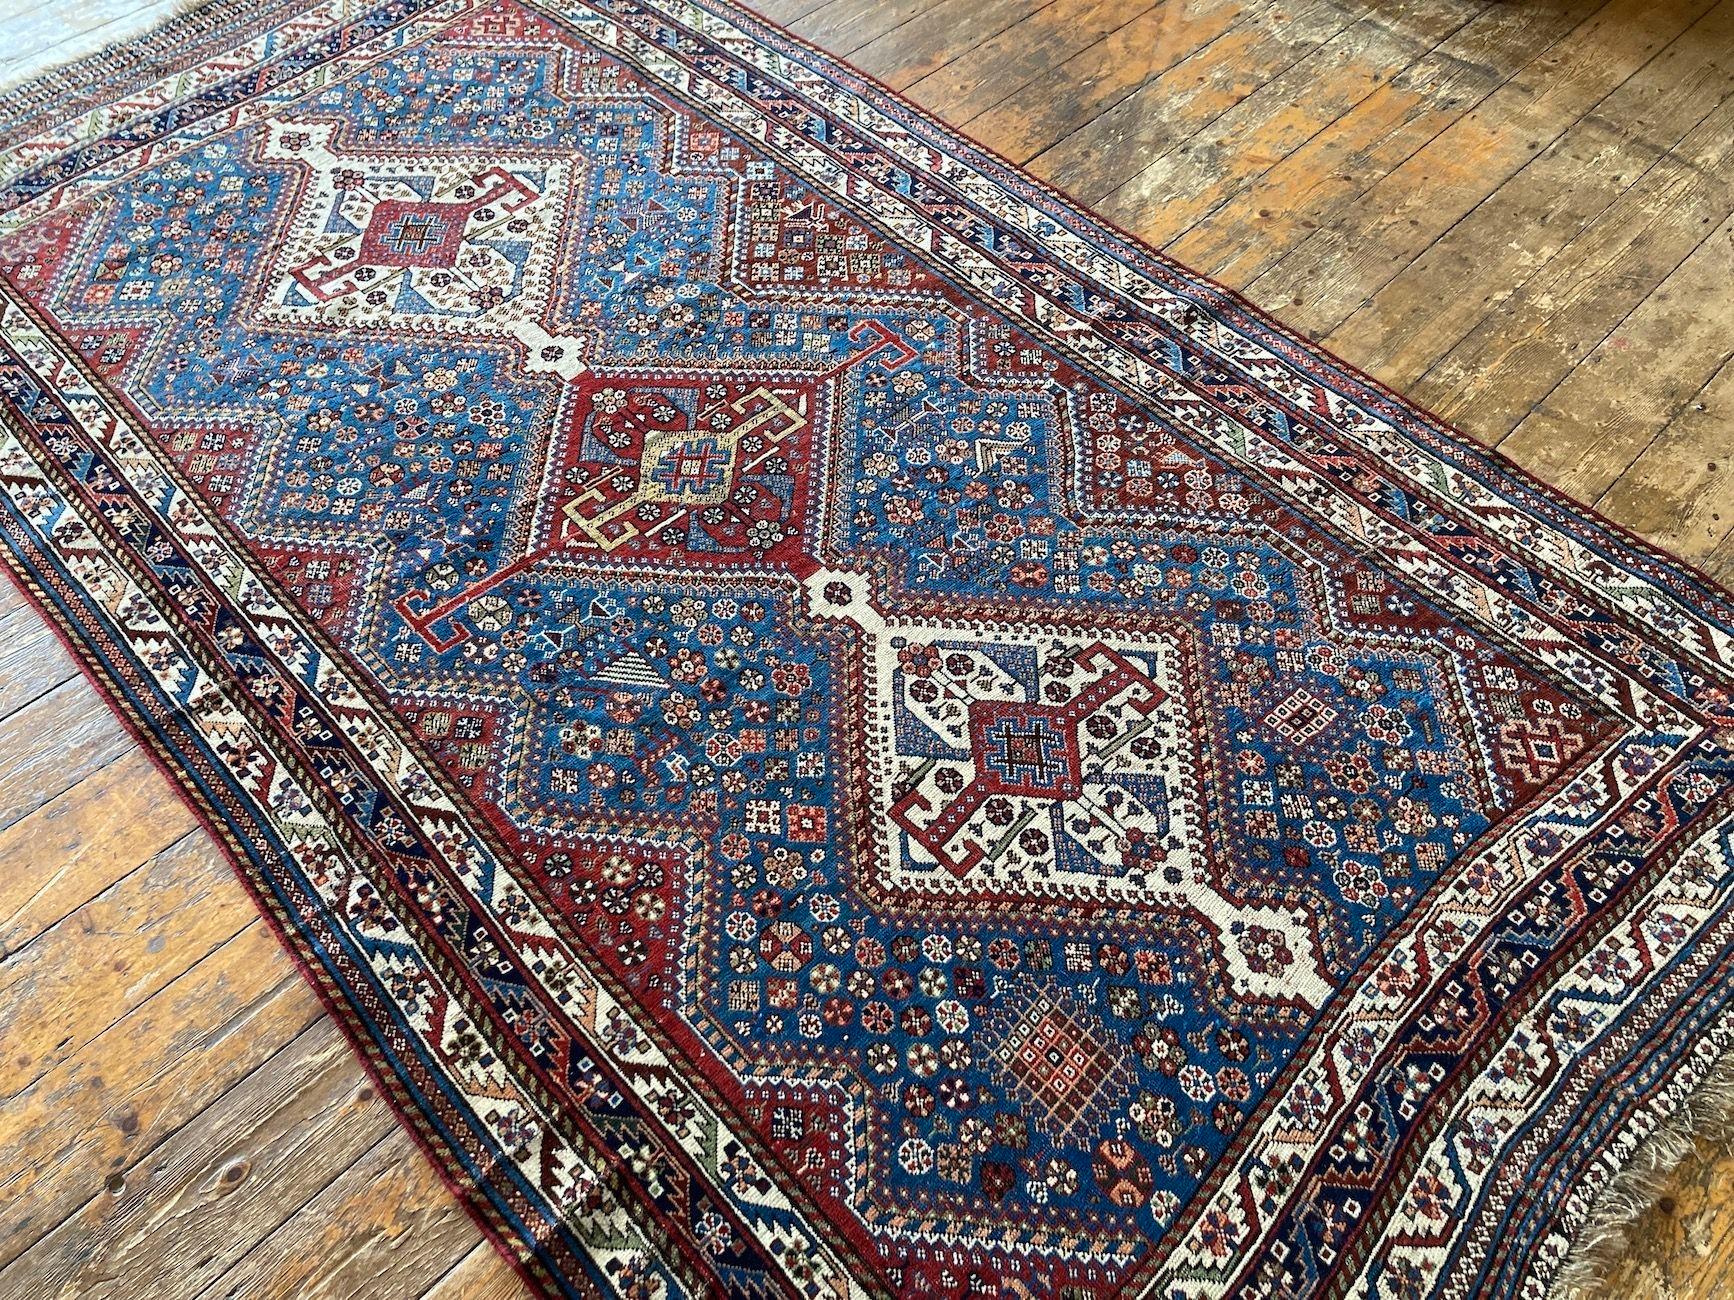 Early 20th Century Antique Qashqai Rug 2.54m X 1.41m For Sale